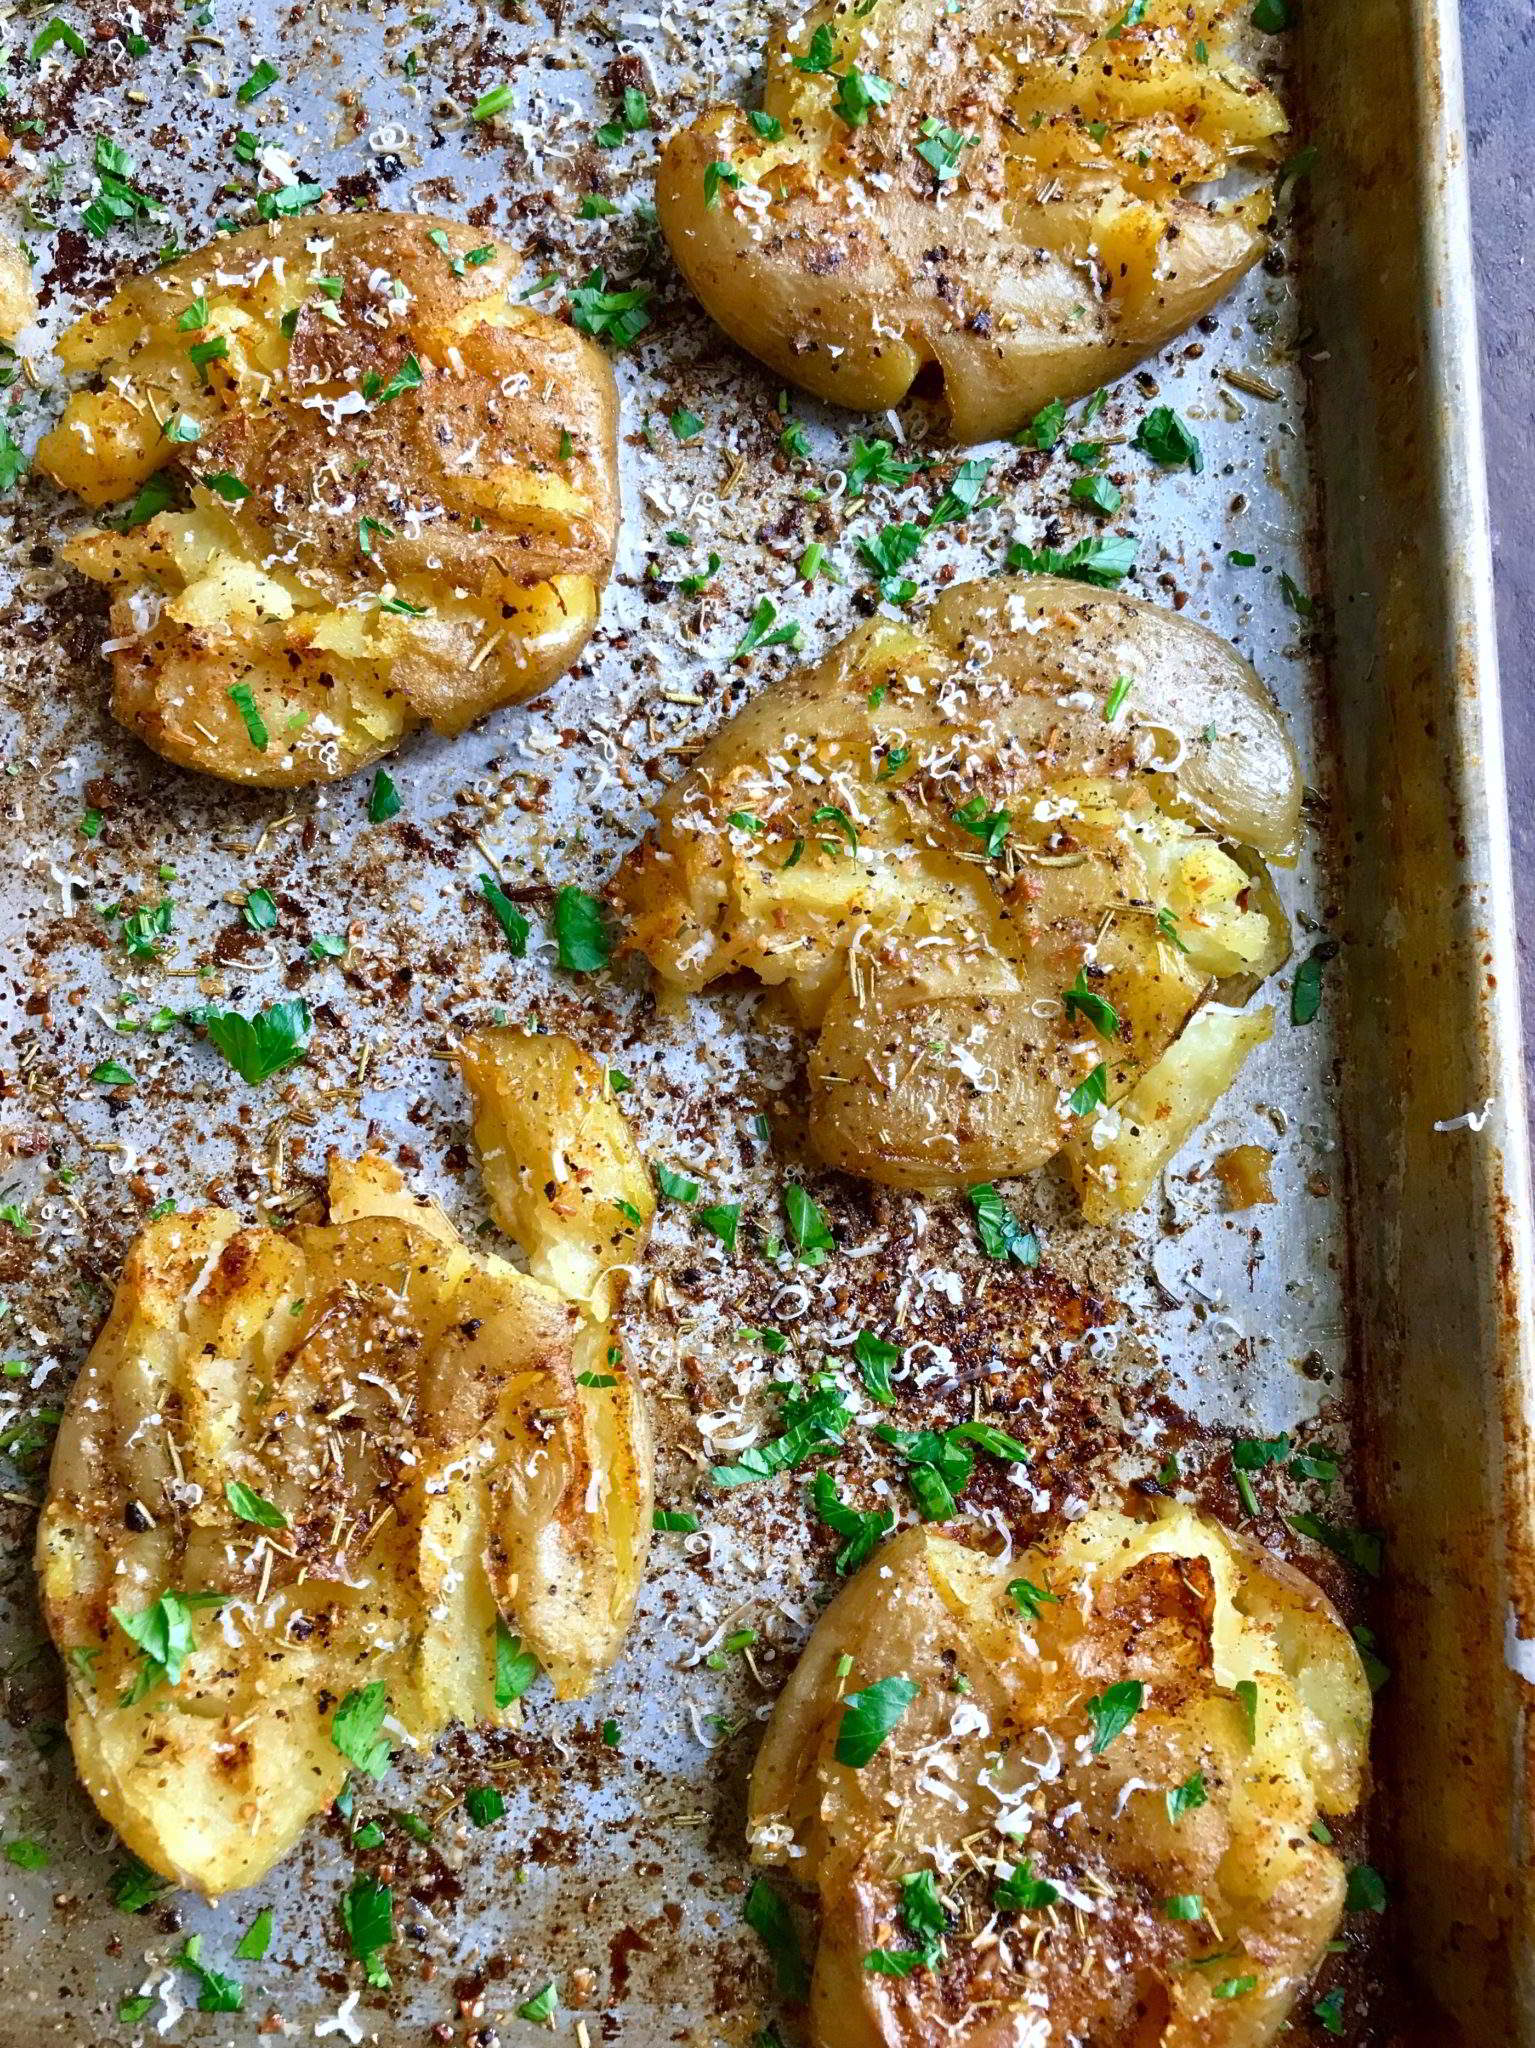 Parmesan Herbed Potatoes on a baking tray